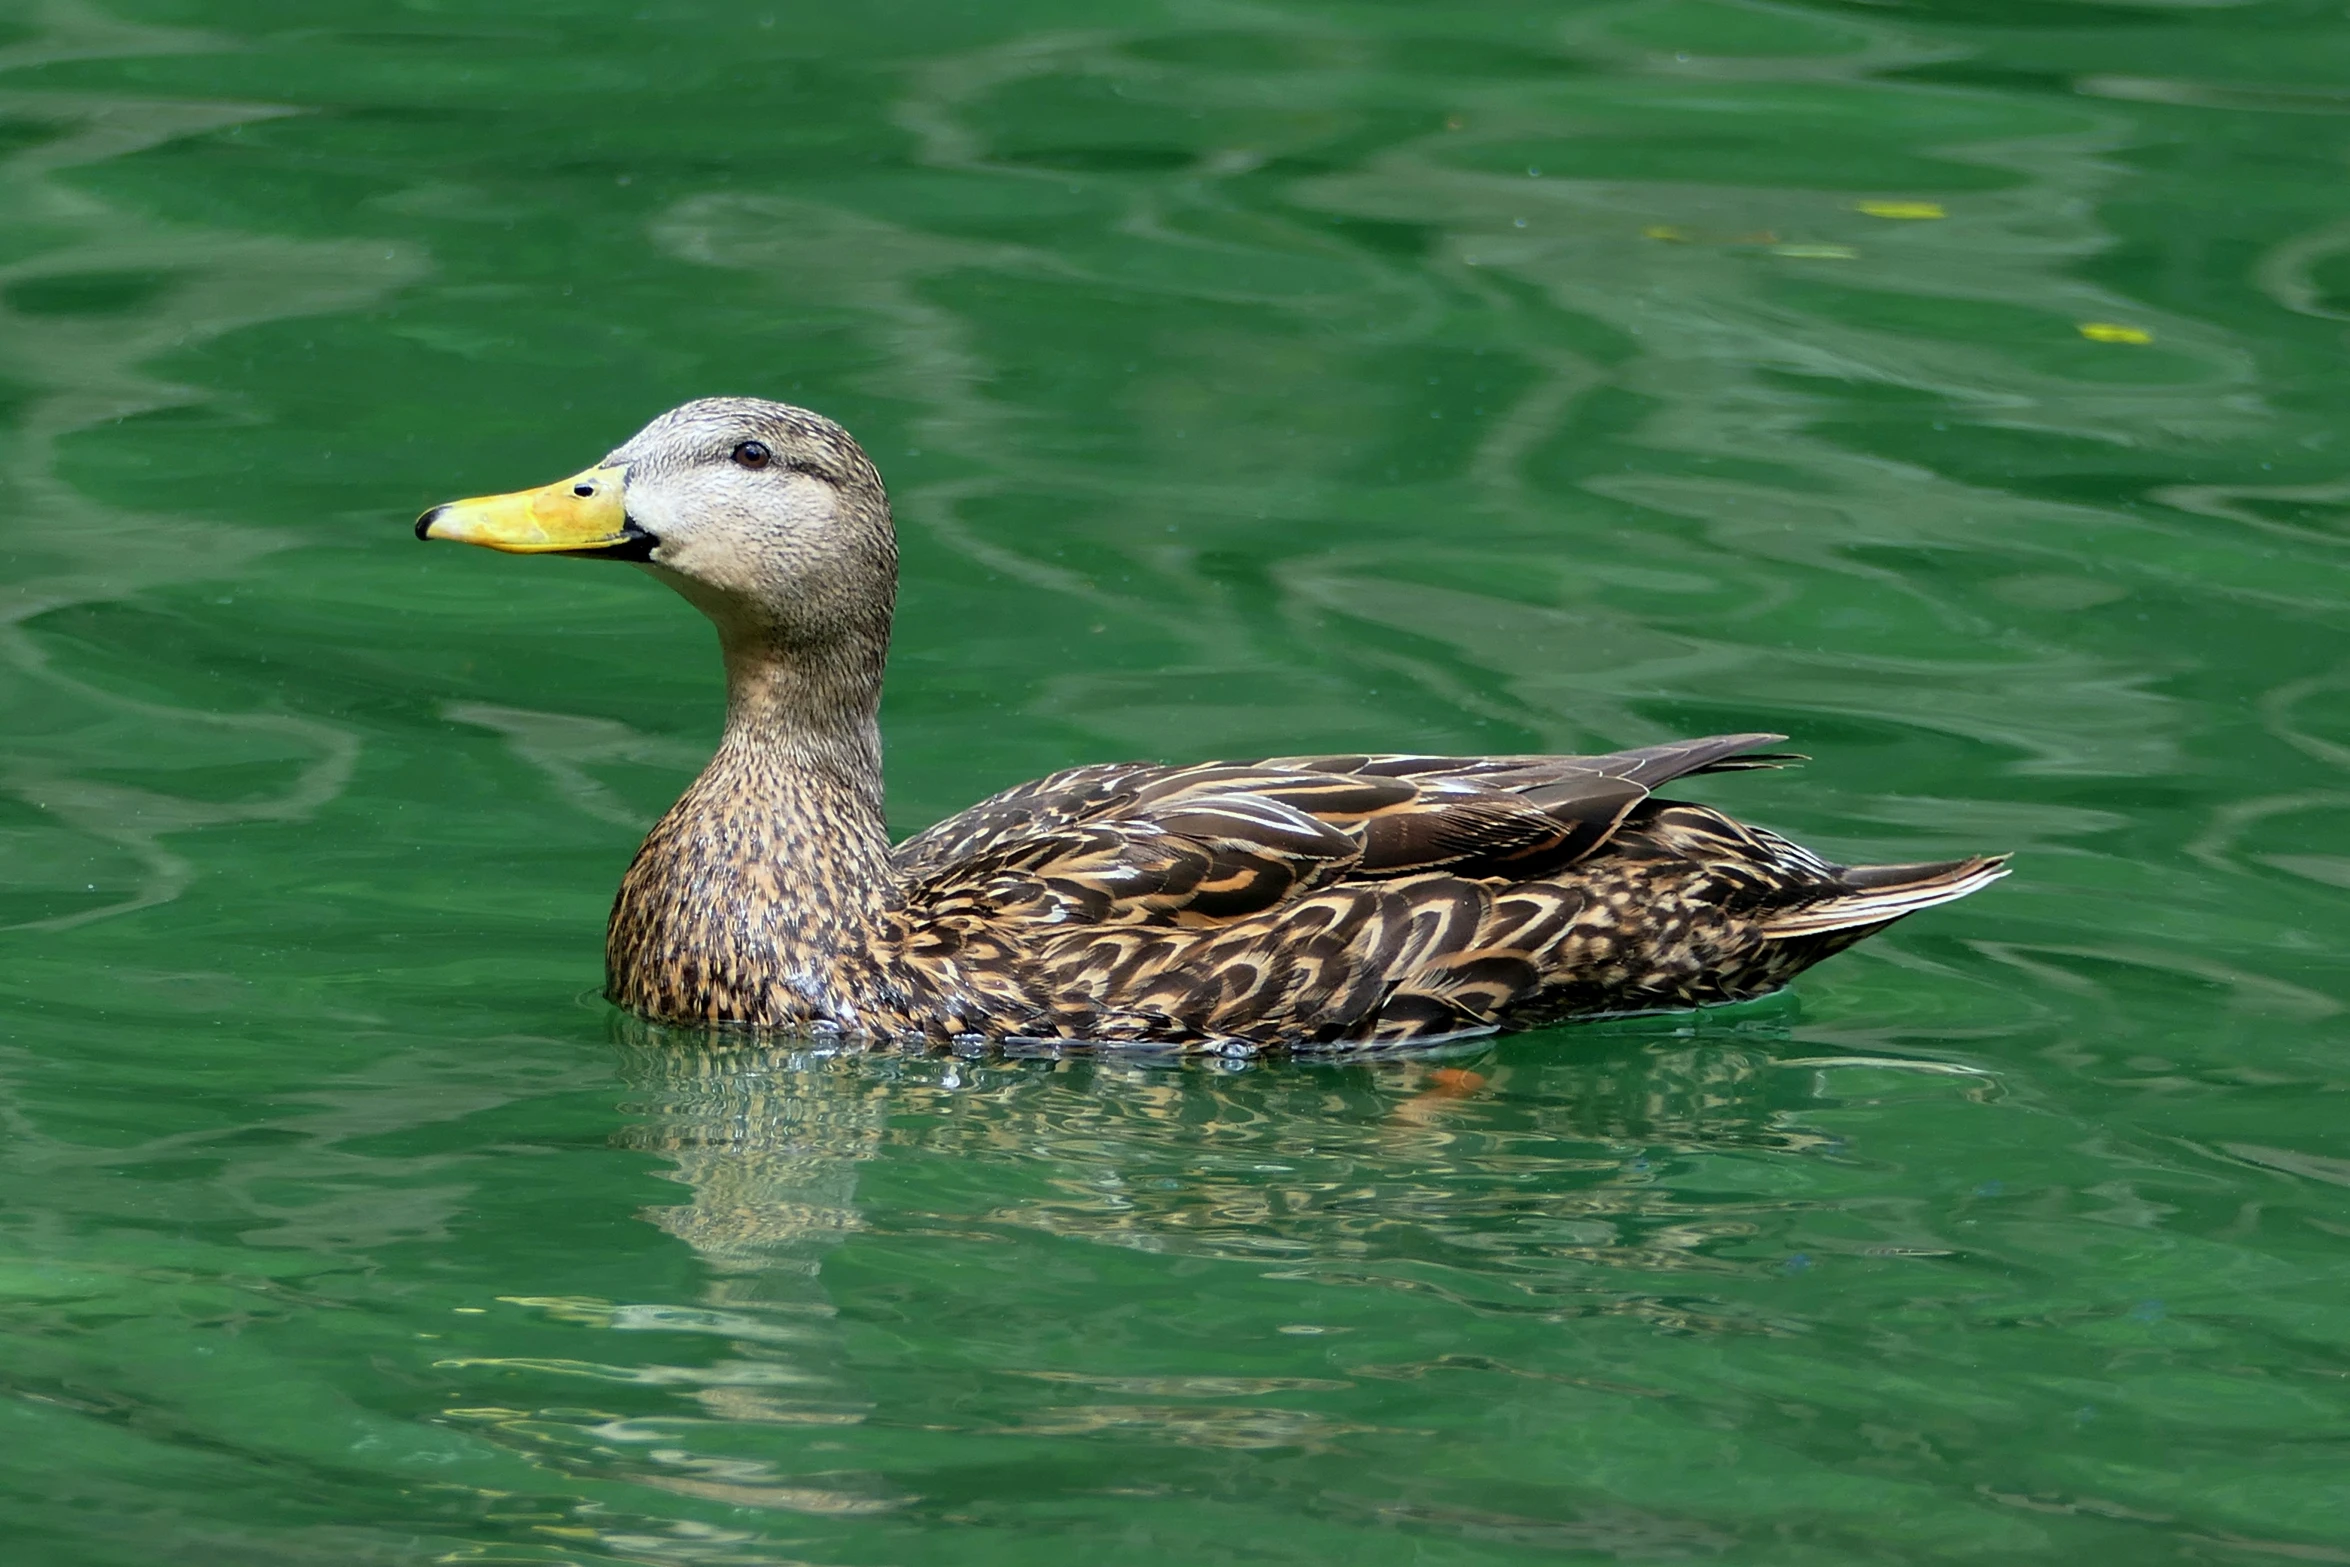 a duck swimming in some green water